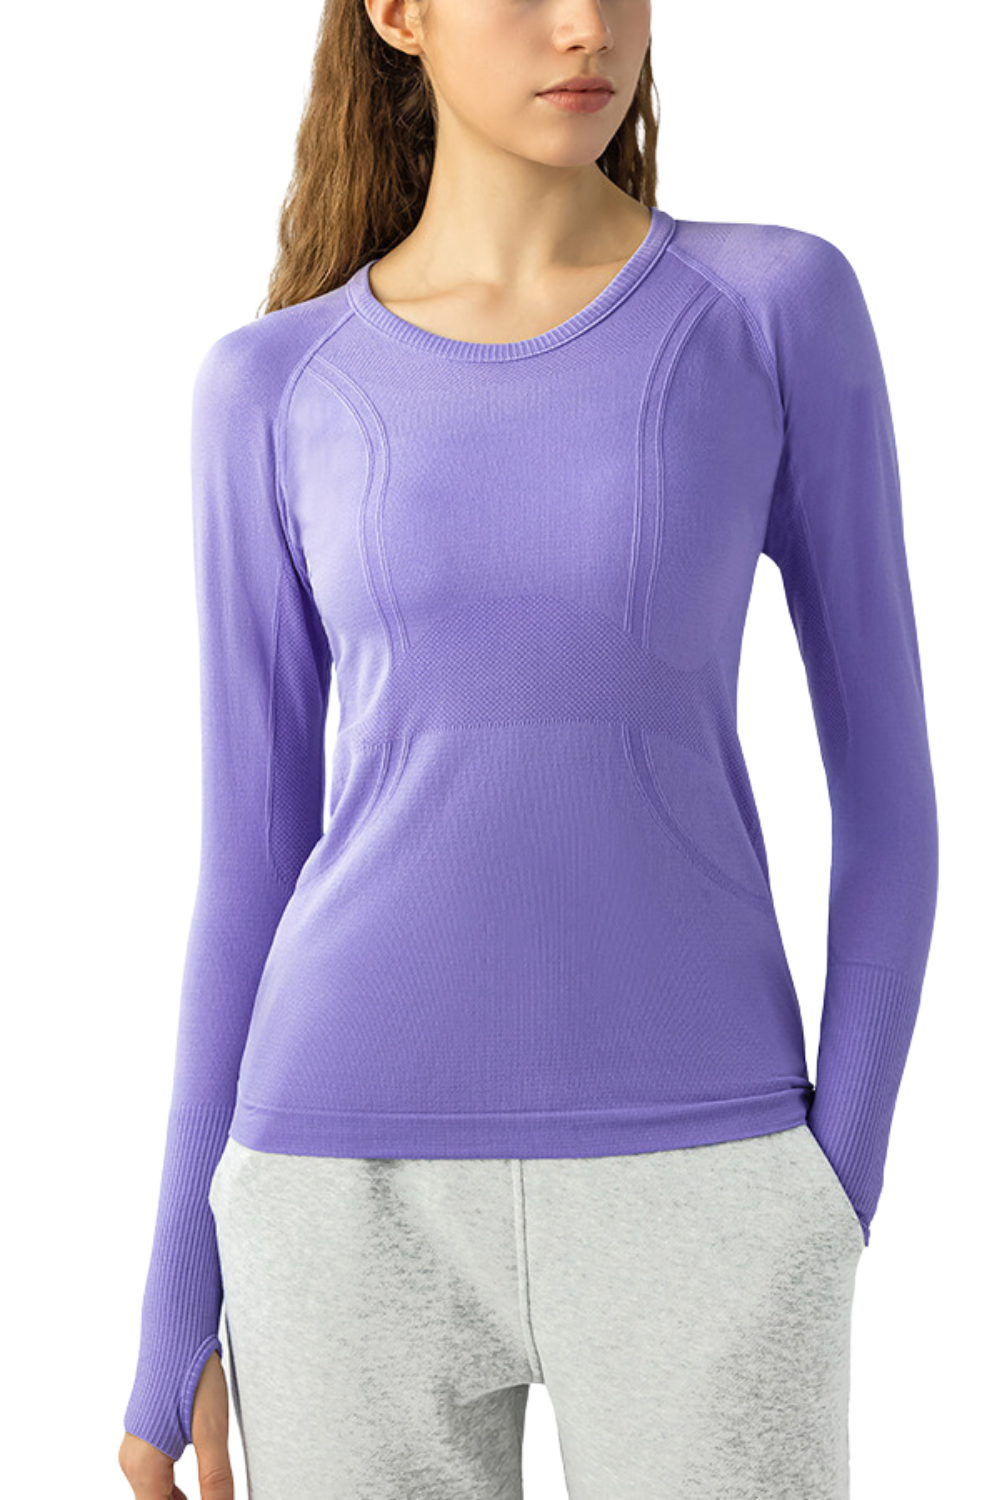 Long Sleeve Navalora Fit Active Tee Swiftly Dupe with Anchor Logo Emblem in Purple on Model